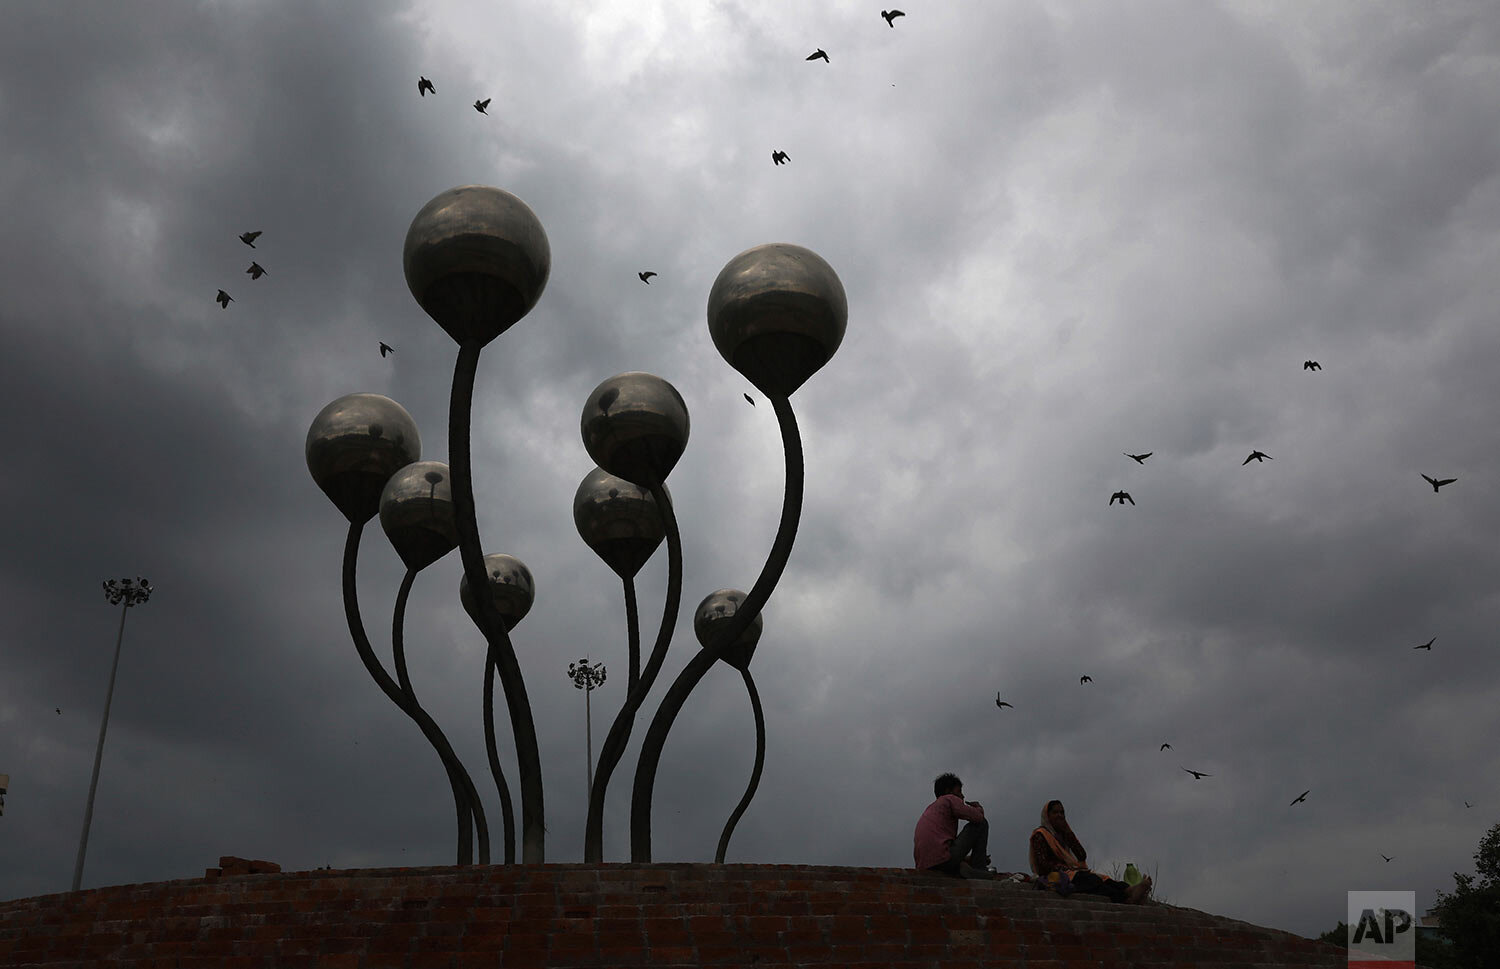  A couple rest next to a sculpture as the sky fills up with heavy monsoon rain clouds in New Delhi, India, Sunday, Aug. 30, 2020. (AP Photo/Manish Swarup) 